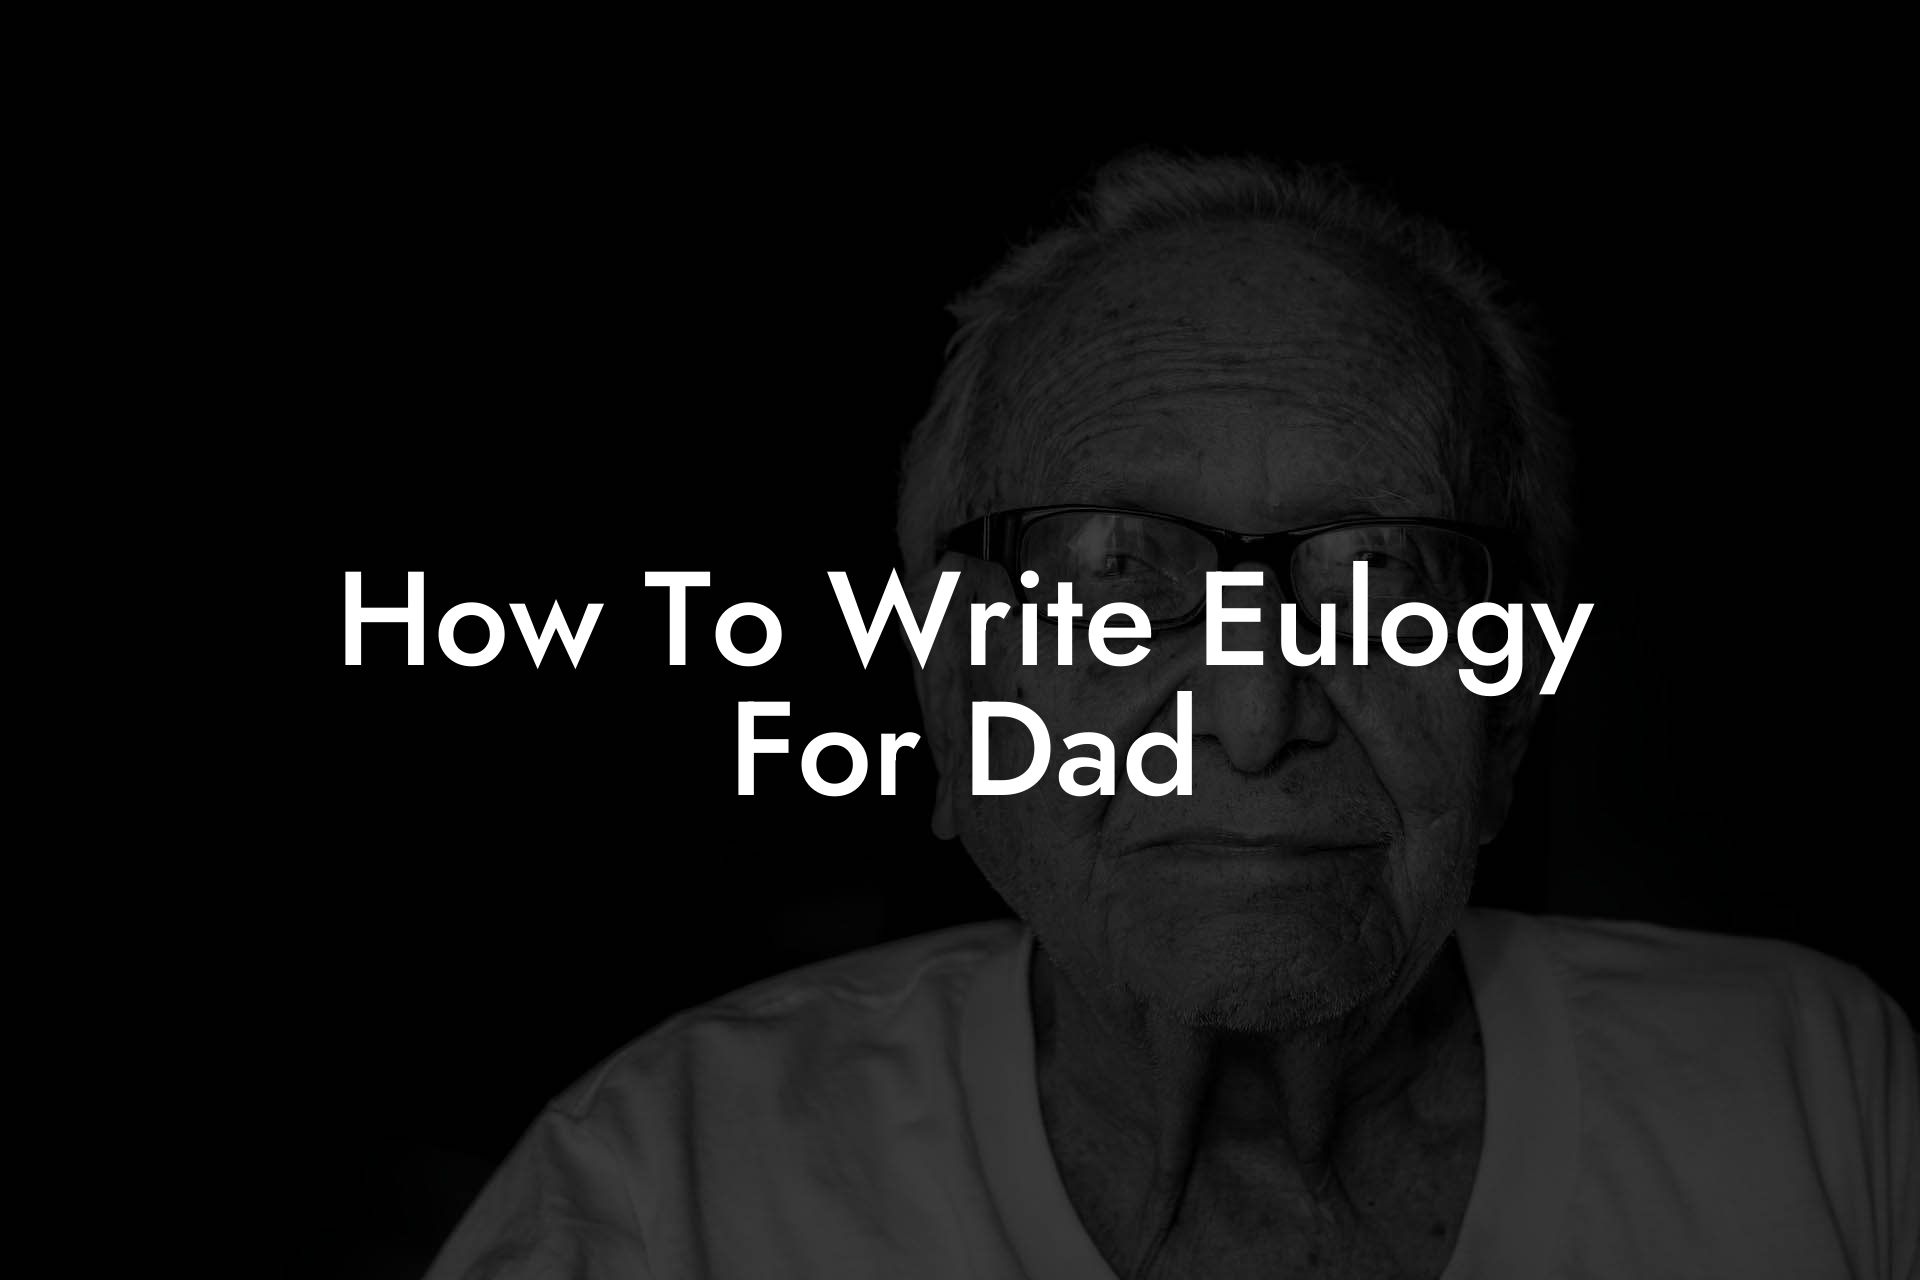 How To Write Eulogy For Dad